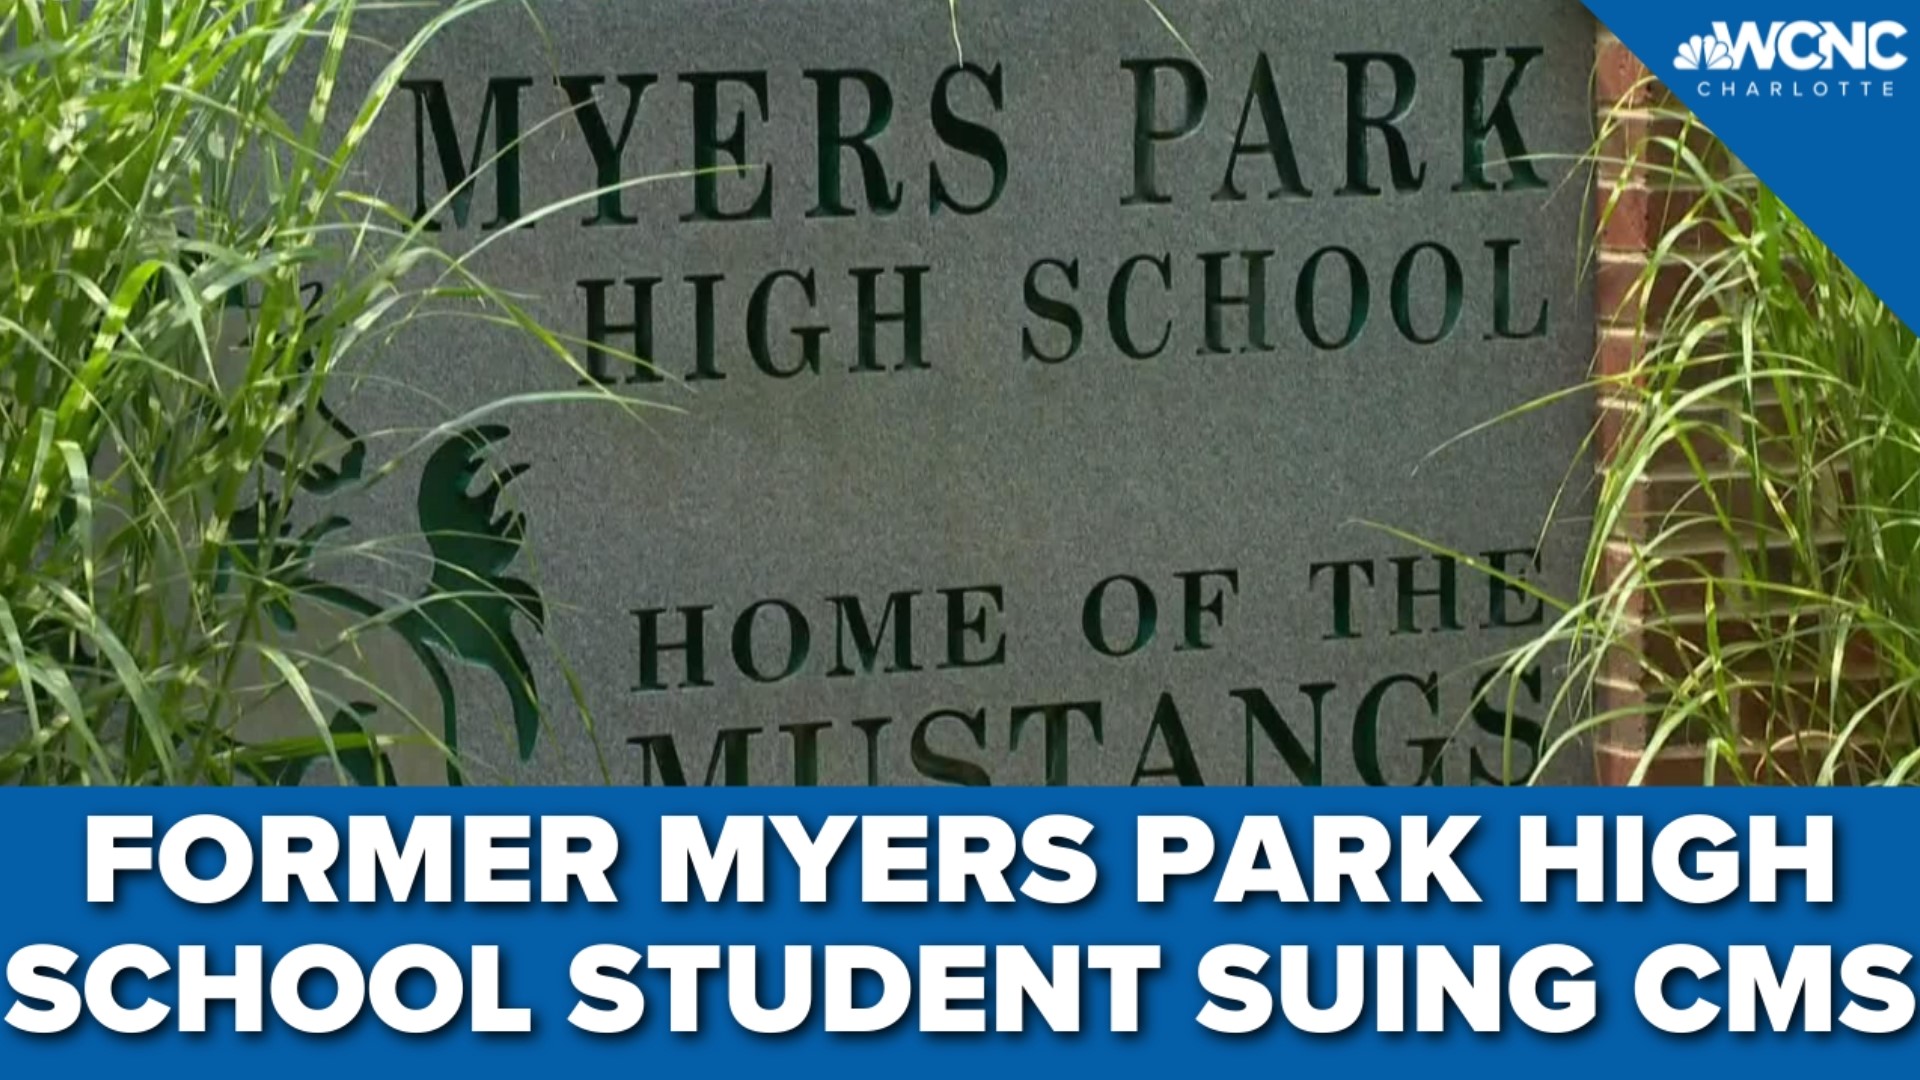 A former Myers Park High School student is suing CMS for what she calls a failure to prevent her sexual assault.